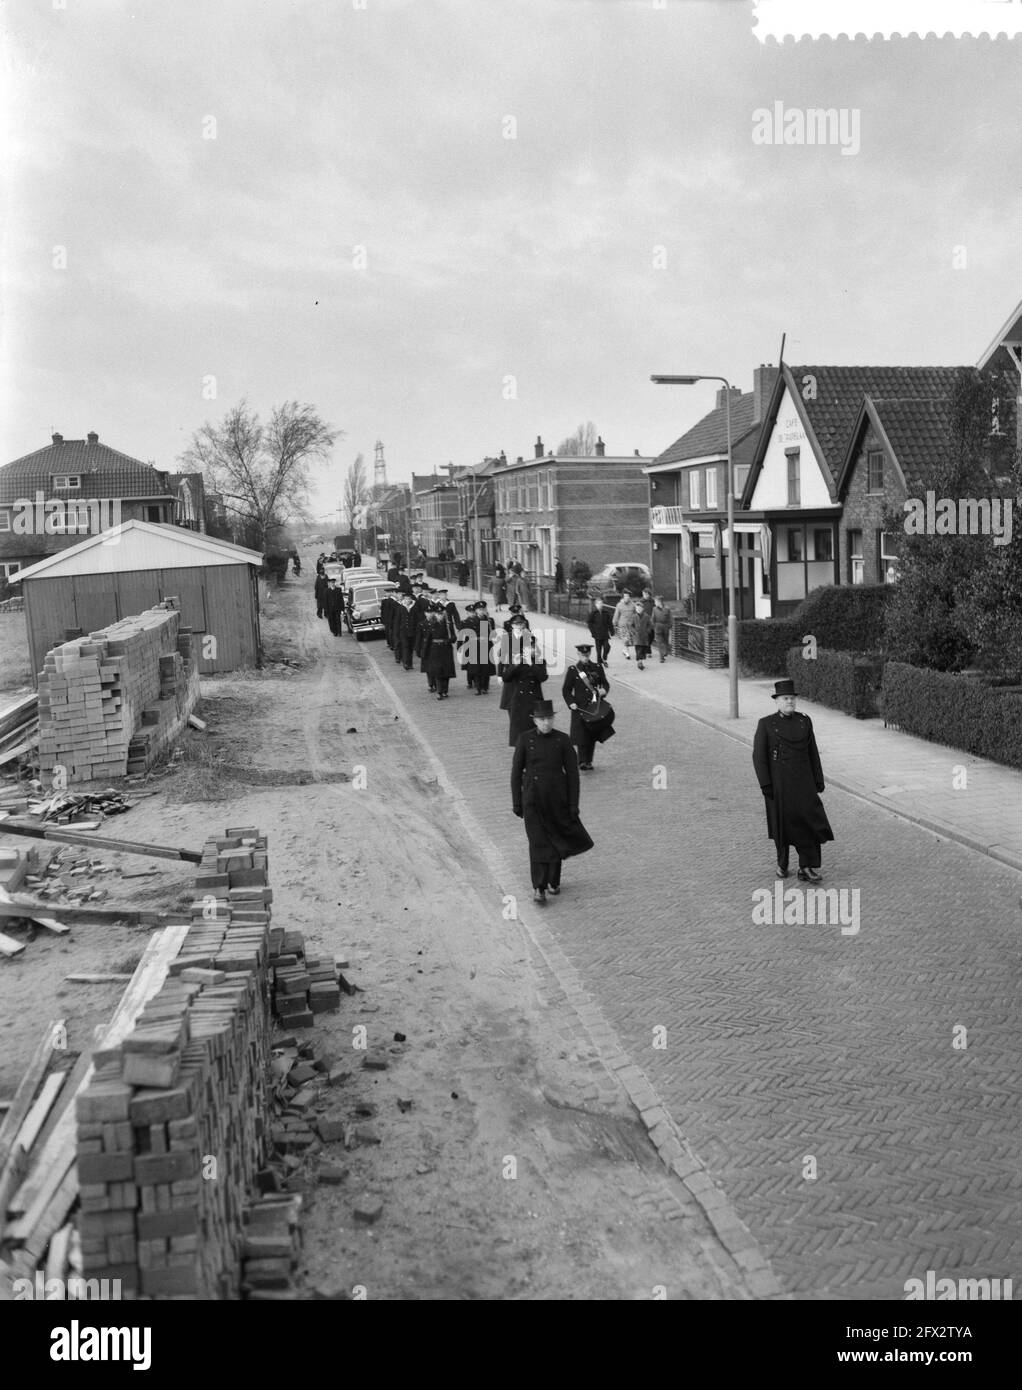 Marvo funeral military workman Krabbedijk in Voorschoten, 9 January 1958, funerals, The Netherlands, 20th century press agency photo, news to remember, documentary, historic photography 1945-1990, visual stories, human history of the Twentieth Century, capturing moments in time Stock Photo